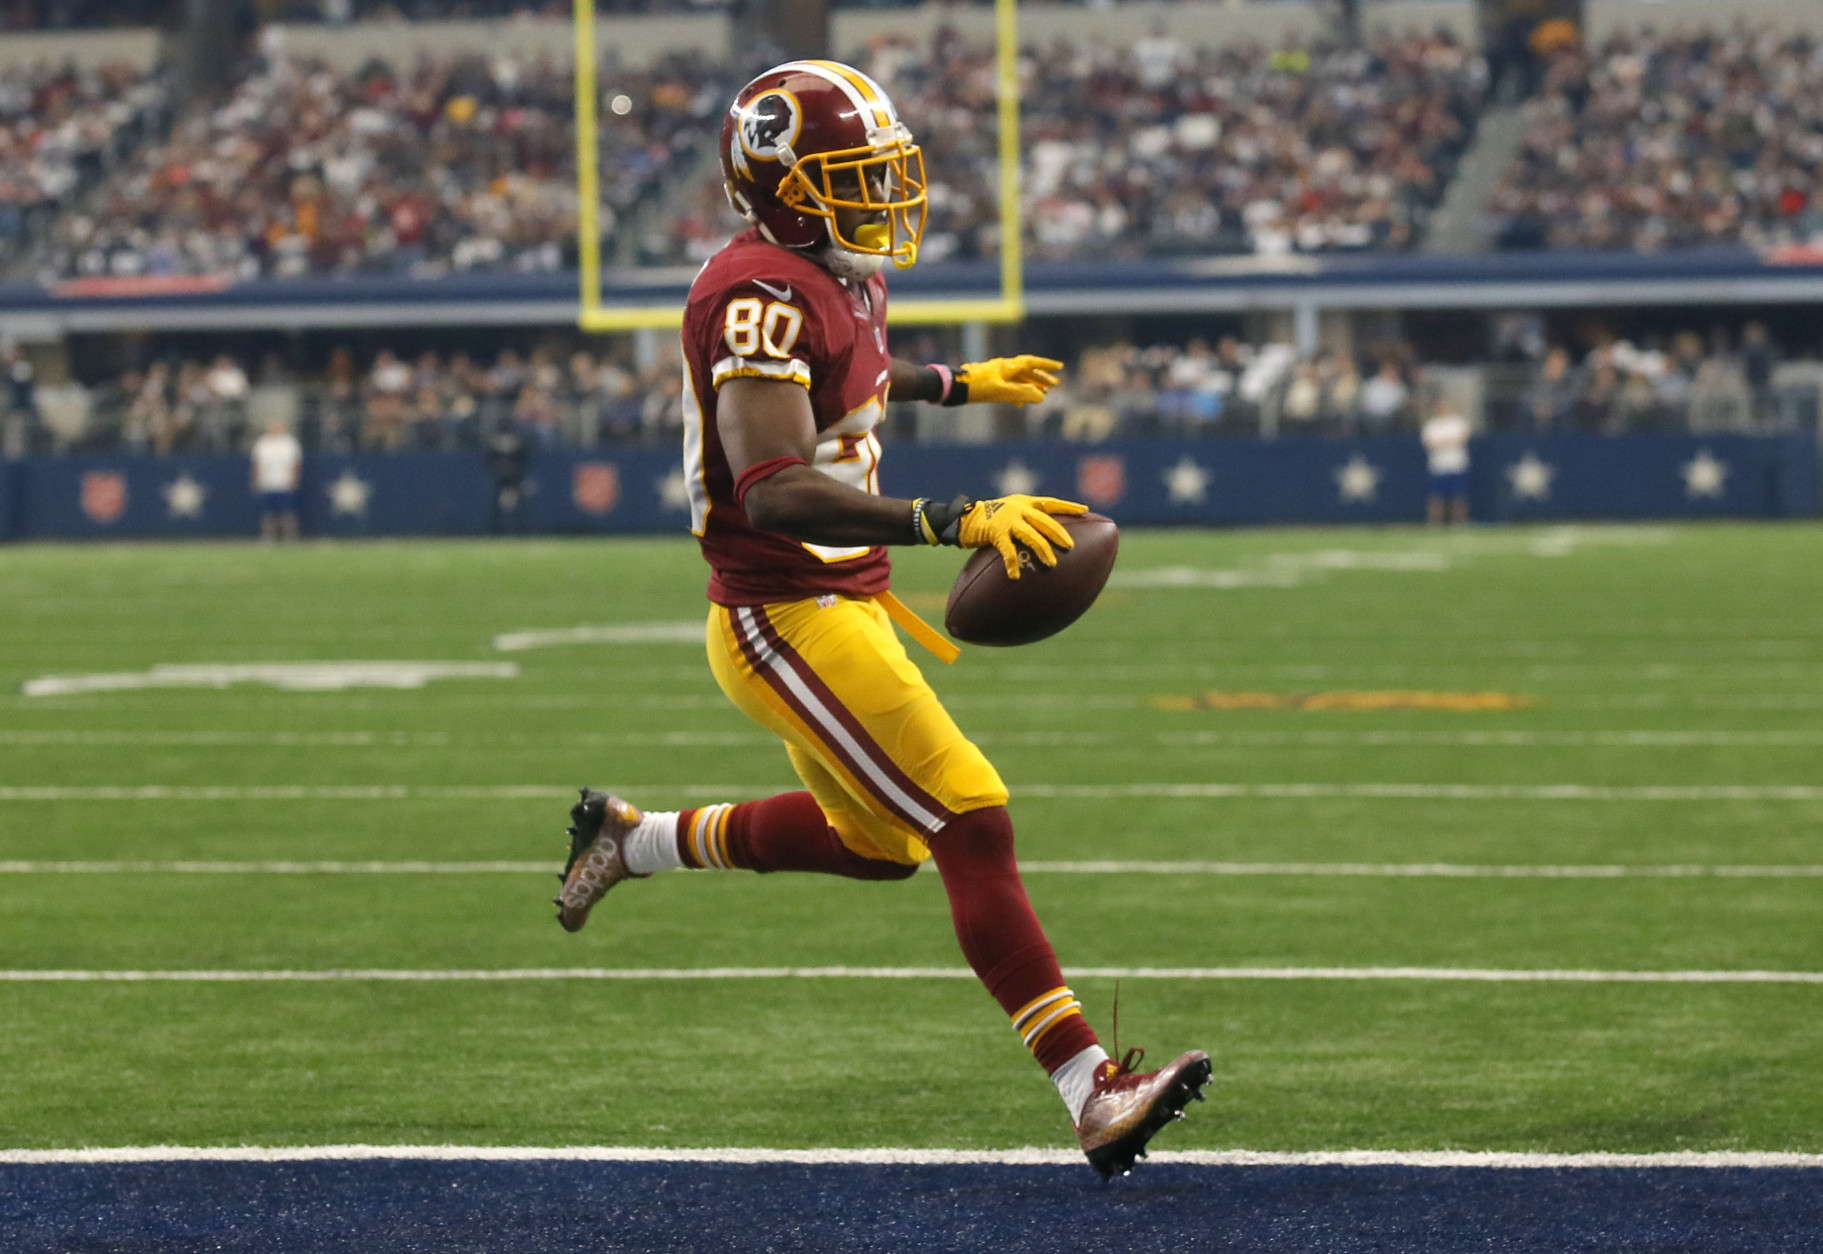 Washington Redskins wide receiver Jamison Crowder enters the end zone for a touchdown after catching a pass in the first half of an NFL football game against the Dallas Cowboys on Sunday, Jan. 3, 2016, in Arlington, Texas. (AP Photo/Michael Ainsworth)